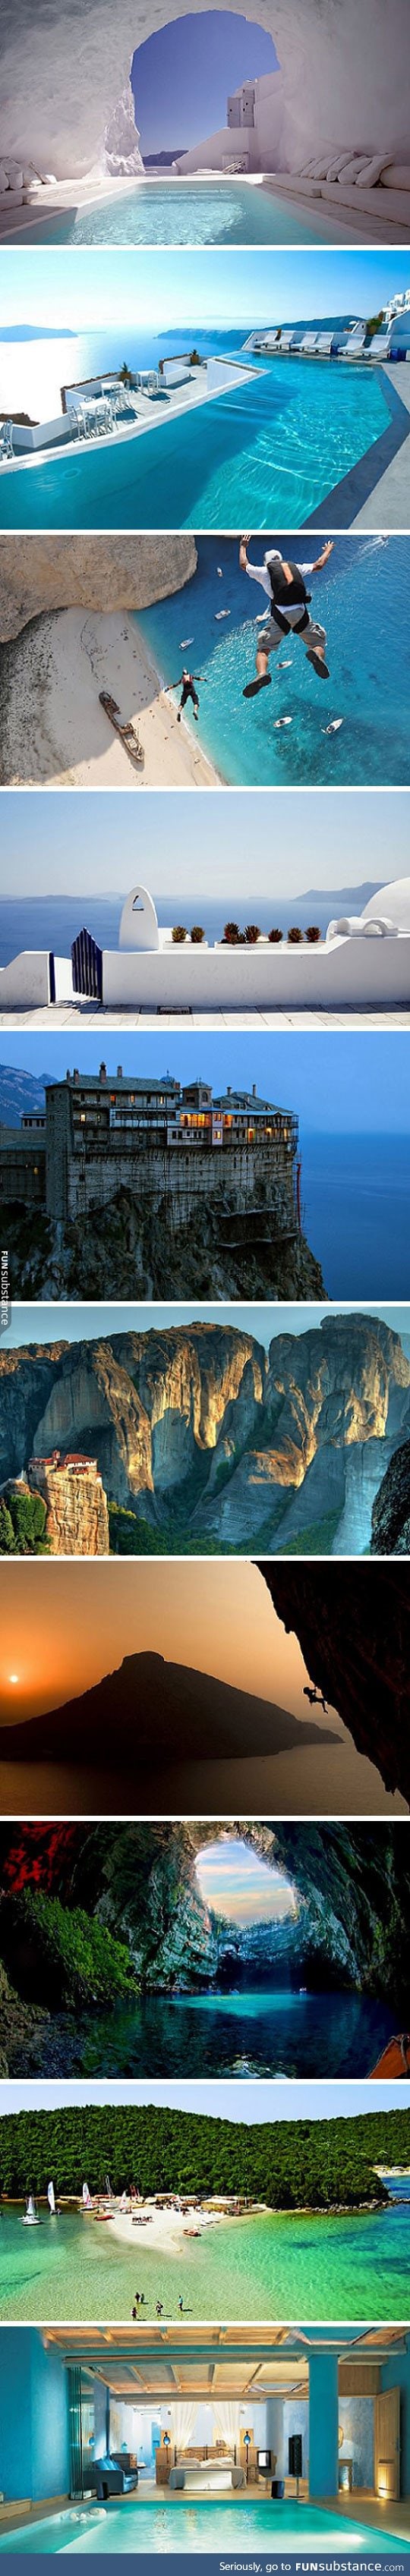 I think I need to visit greece this year